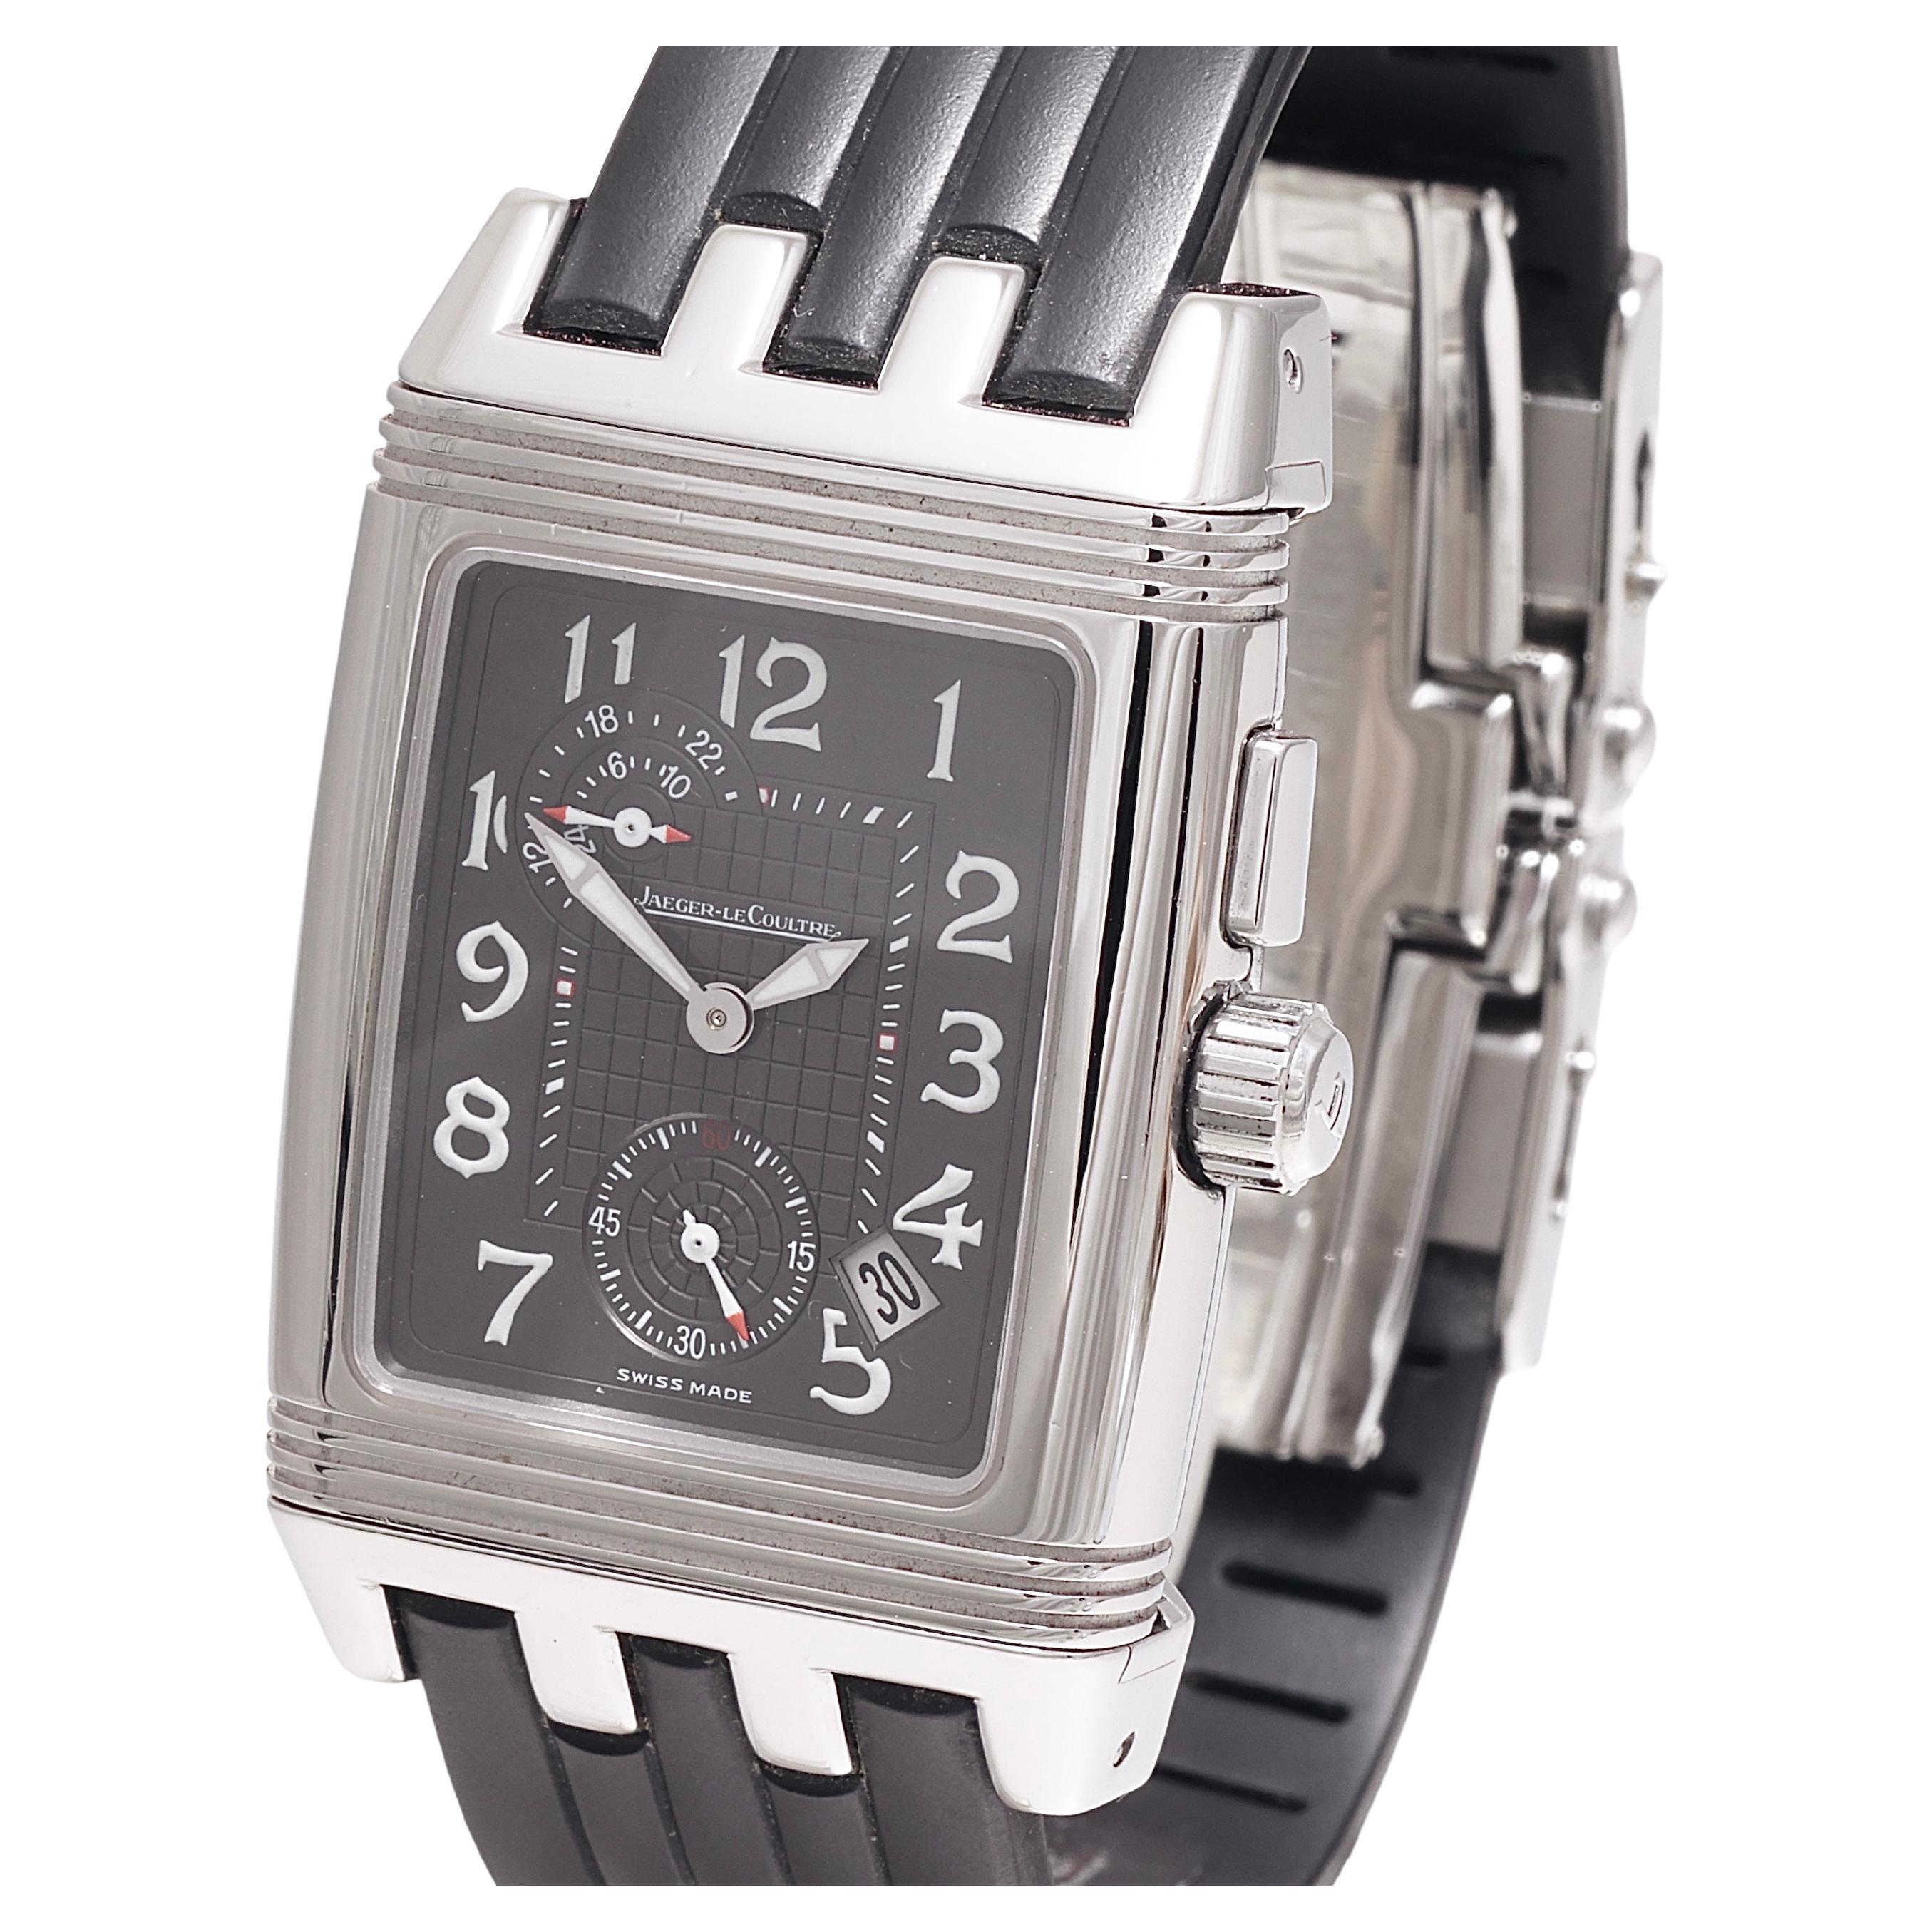 Jaeger LeCoultre Reverso, Gran Sport, Duo Face, GMT, Stahl, Ref 295.8.51 im Angebot